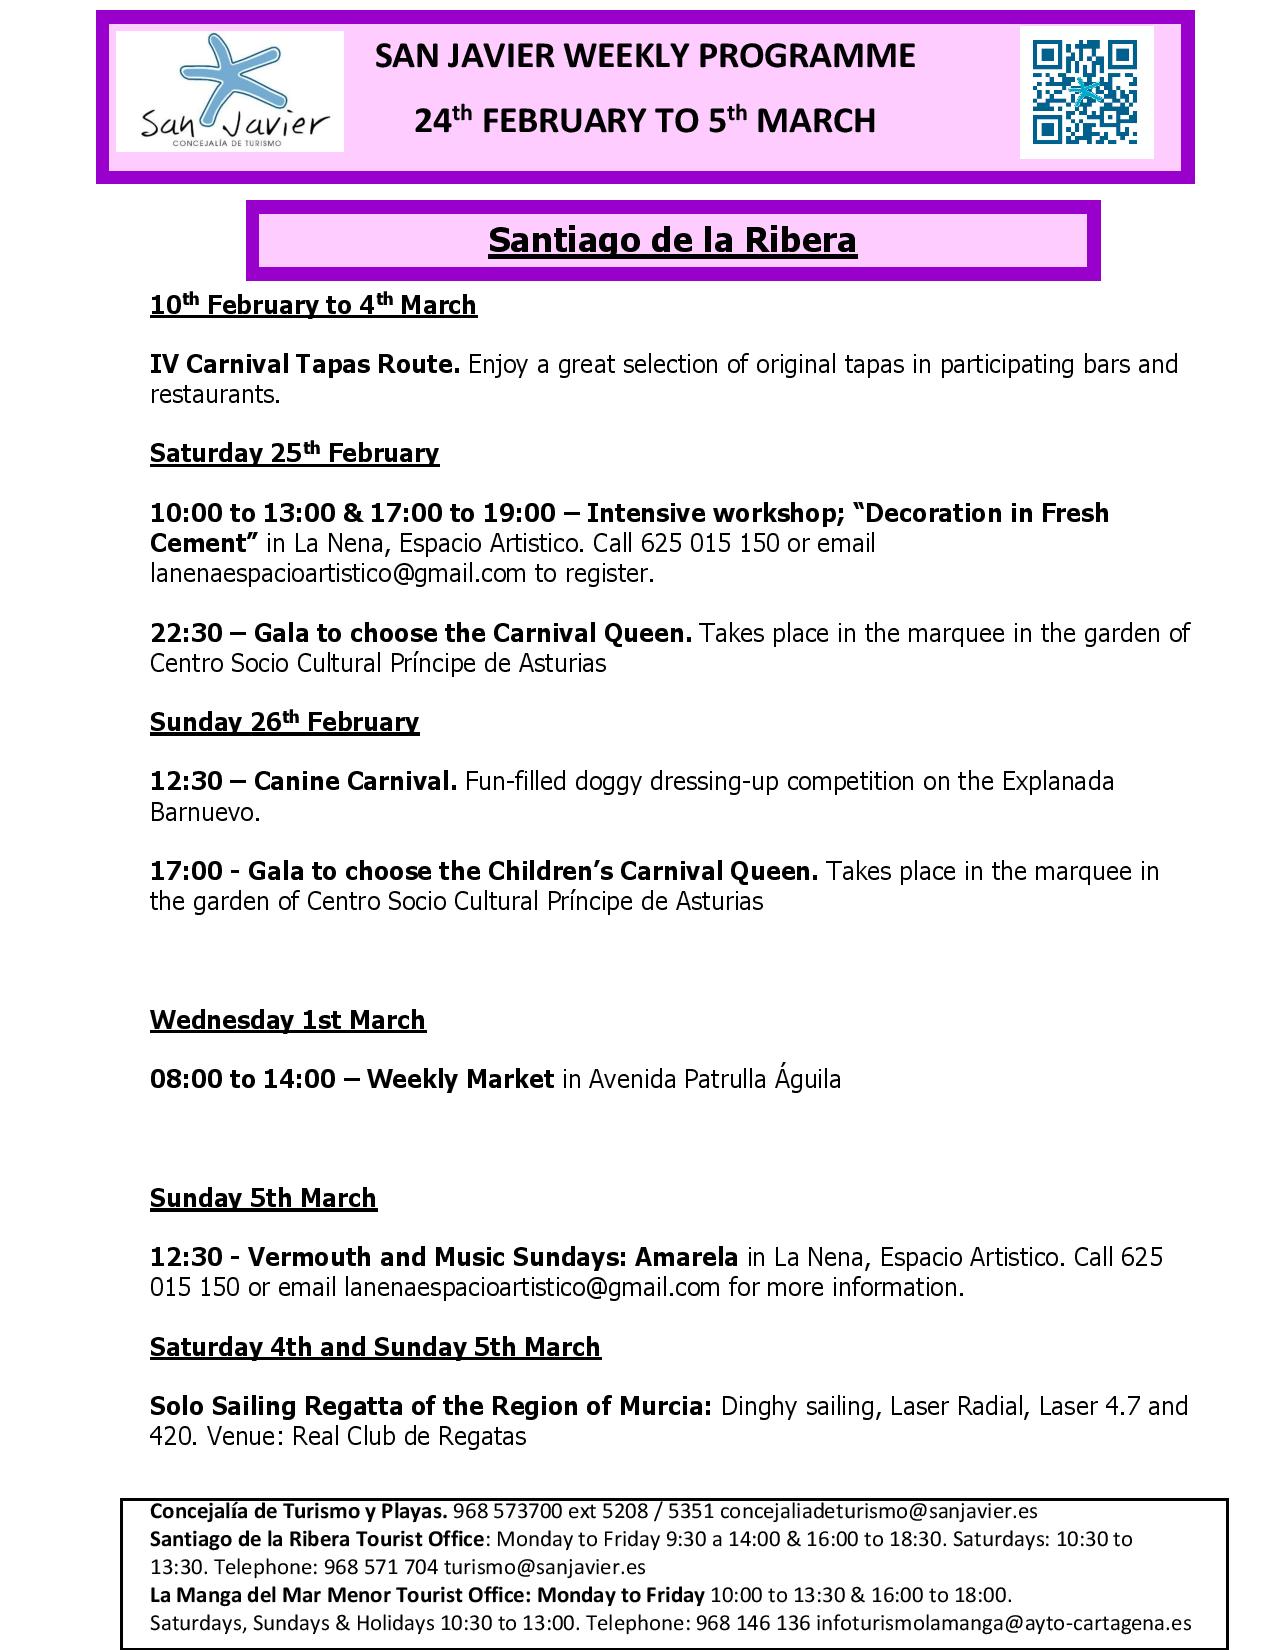 San Javier programme 24-02-17 to 05-03-17-1-page-001